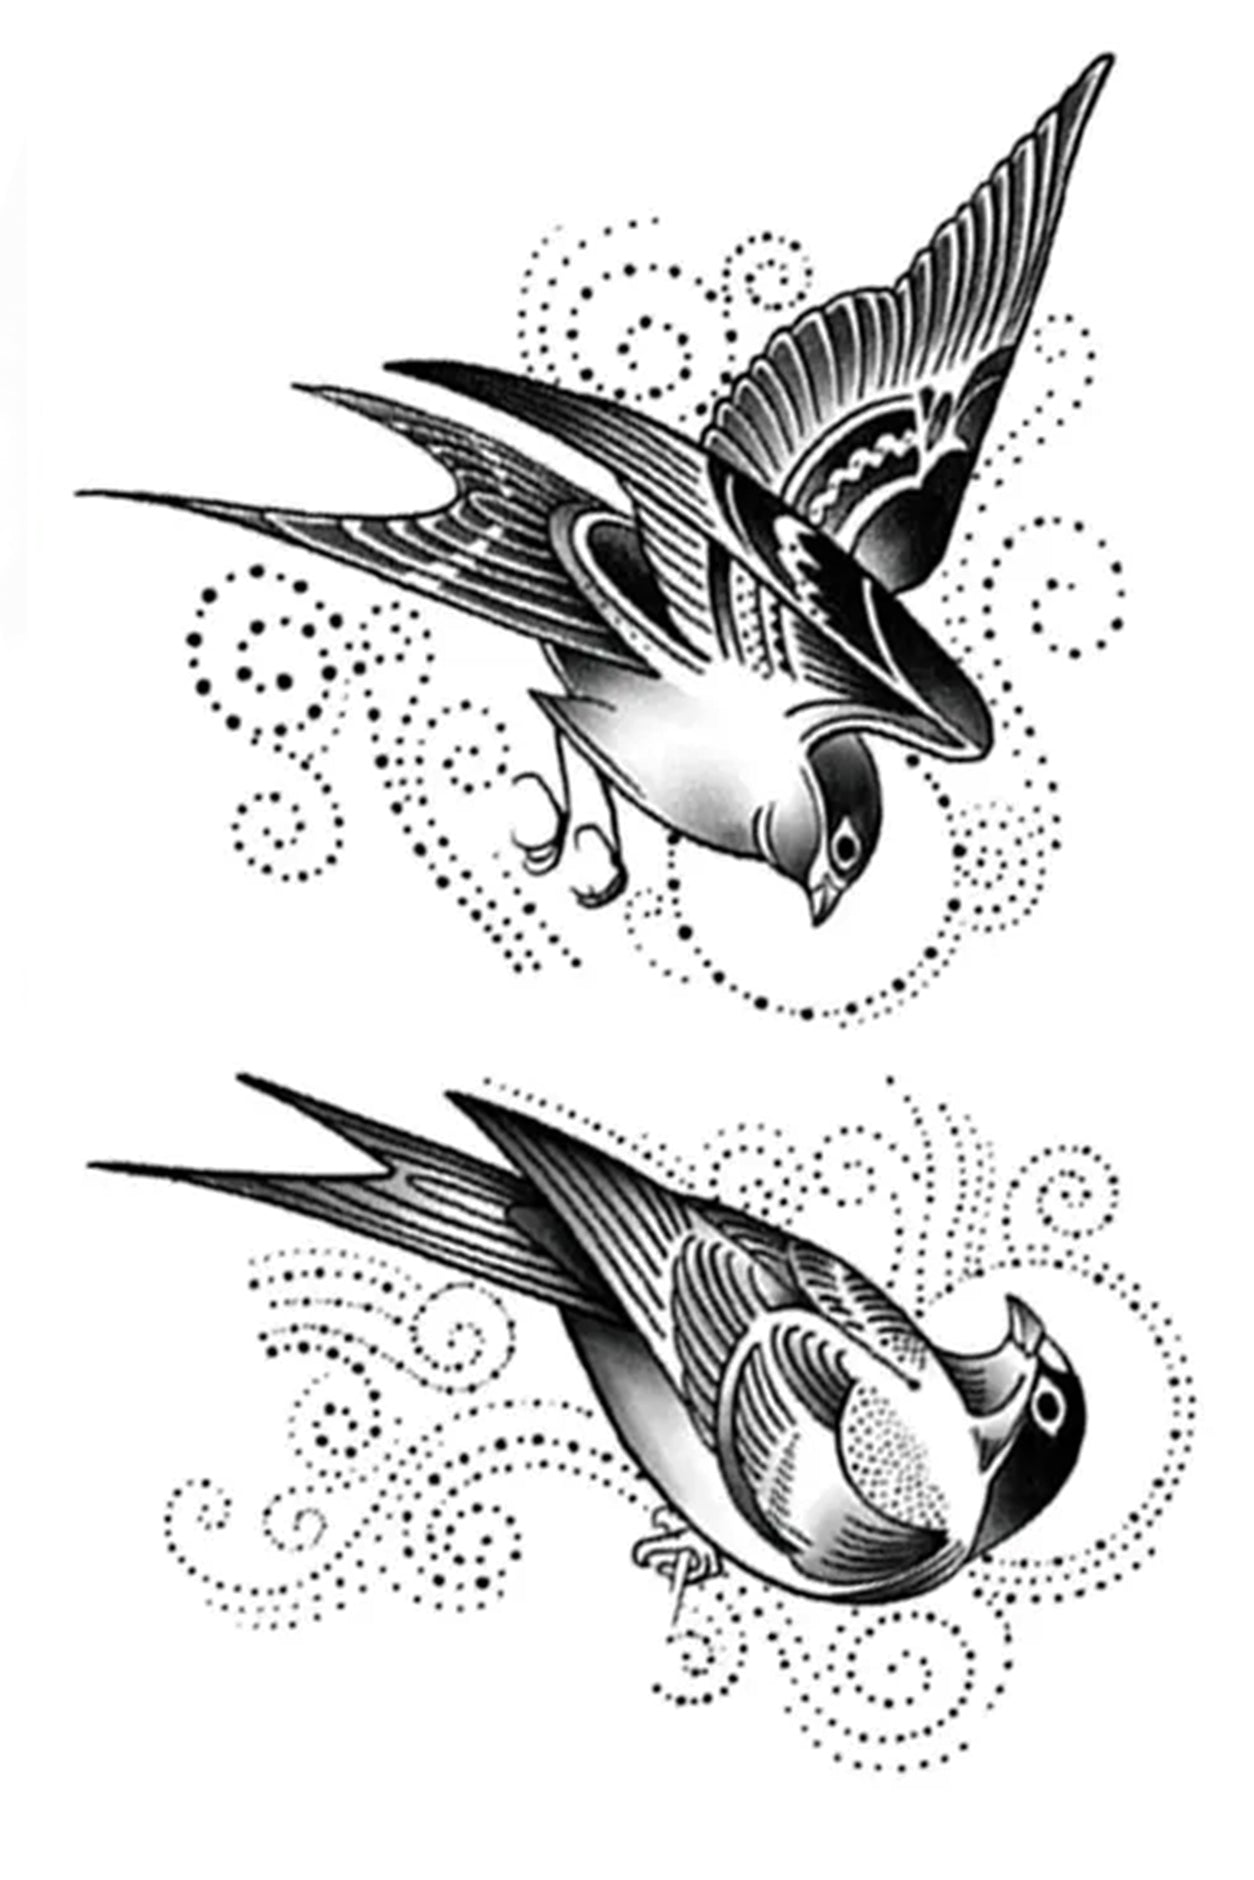 These agile birds are surrounded by a flurry of movement. Wear them together or portion one at a time. Swallows have been considered sacred because they were thought to have flown around the cross of Calvary. 